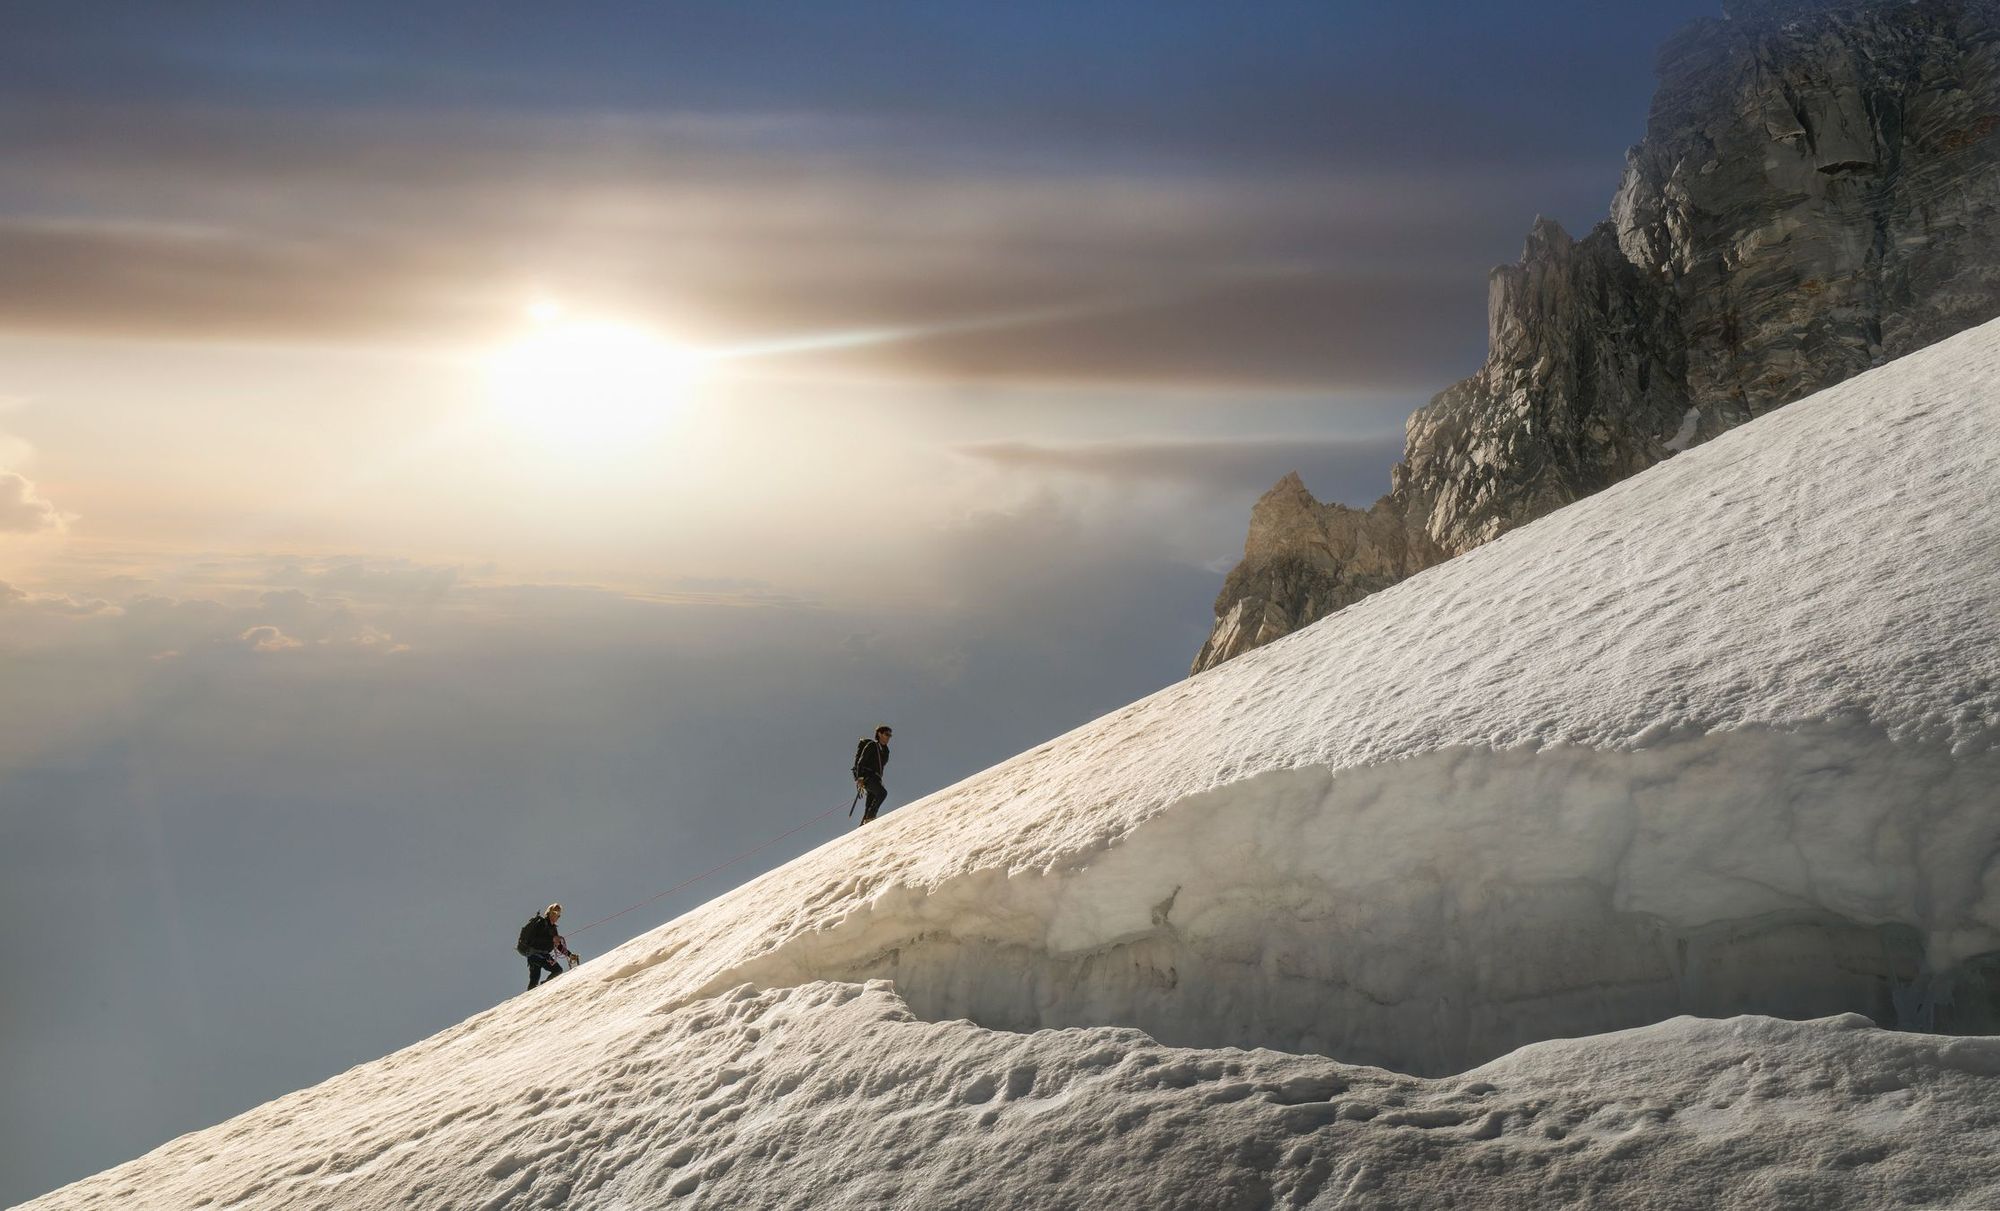 Two climbers on a glacier in Mont Blanc.